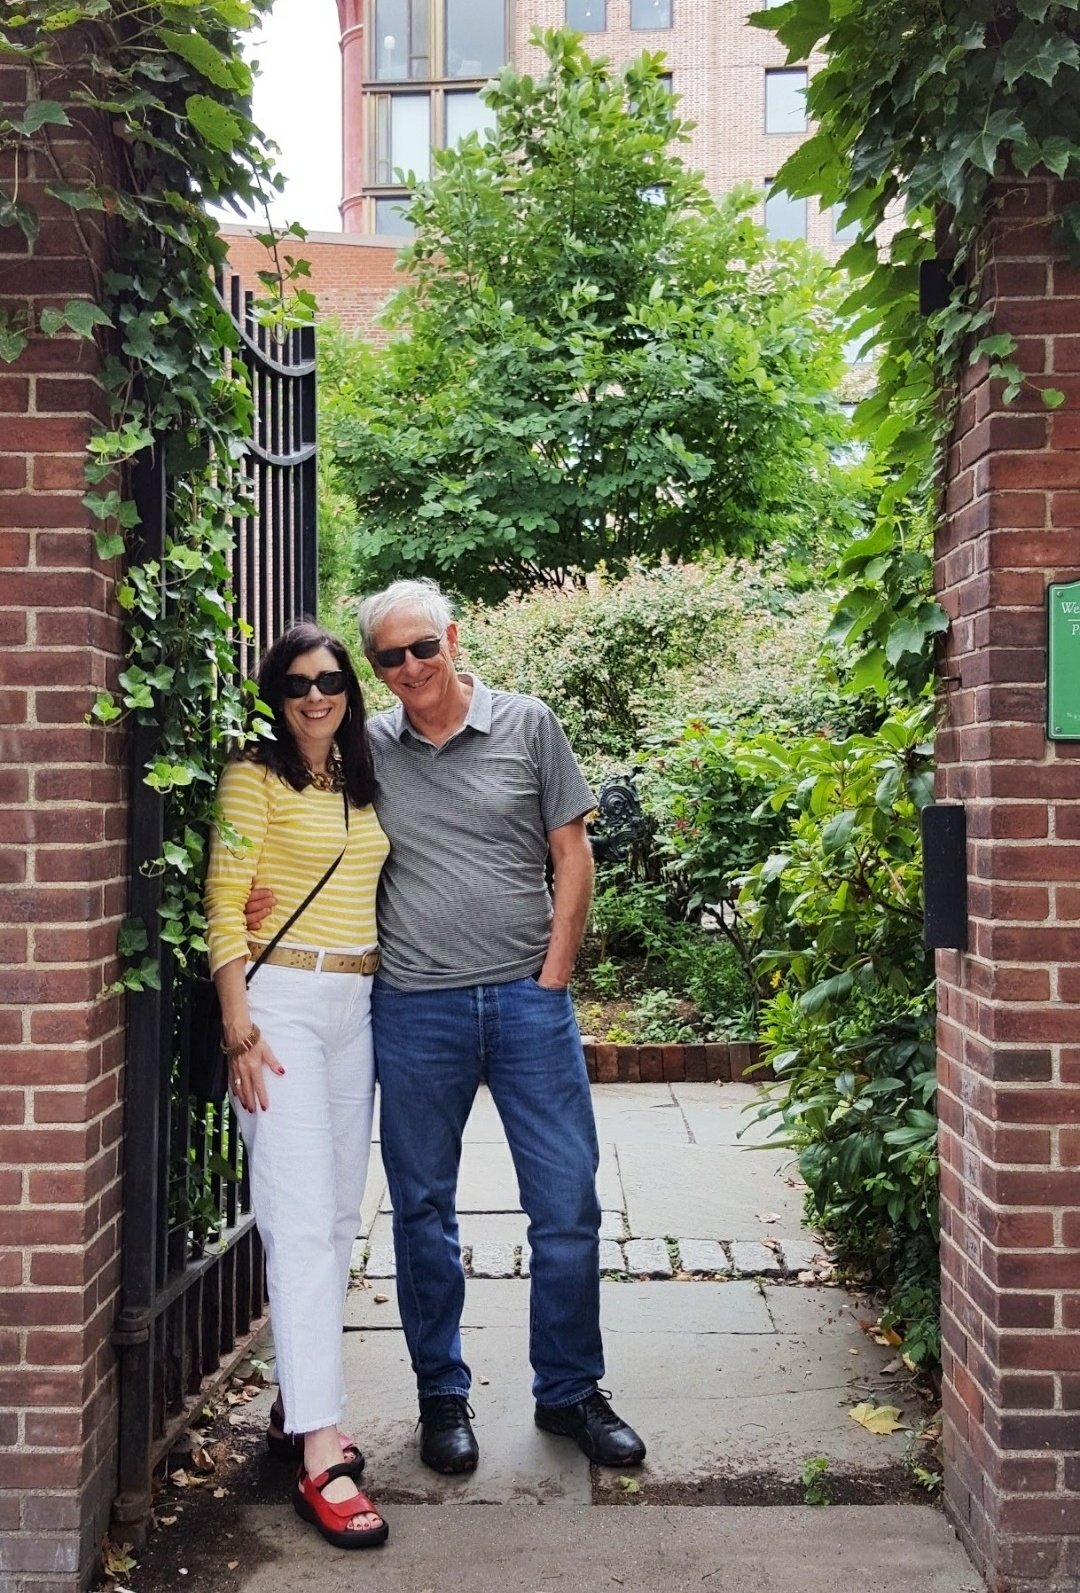 Deborah Main and her husband at the intimate gardens, West Village, NYC